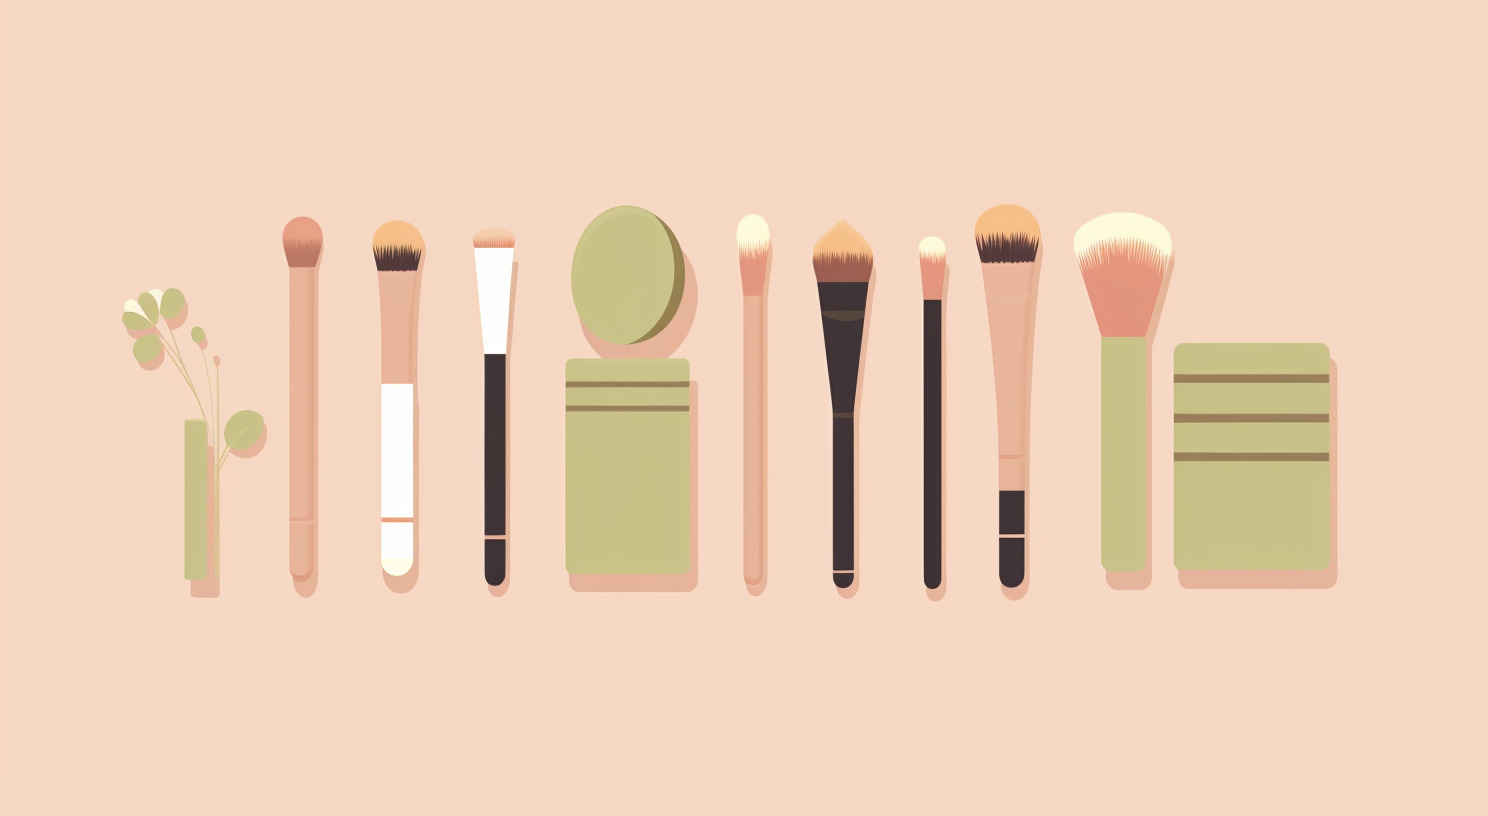 Makeup brushes of various sizes.